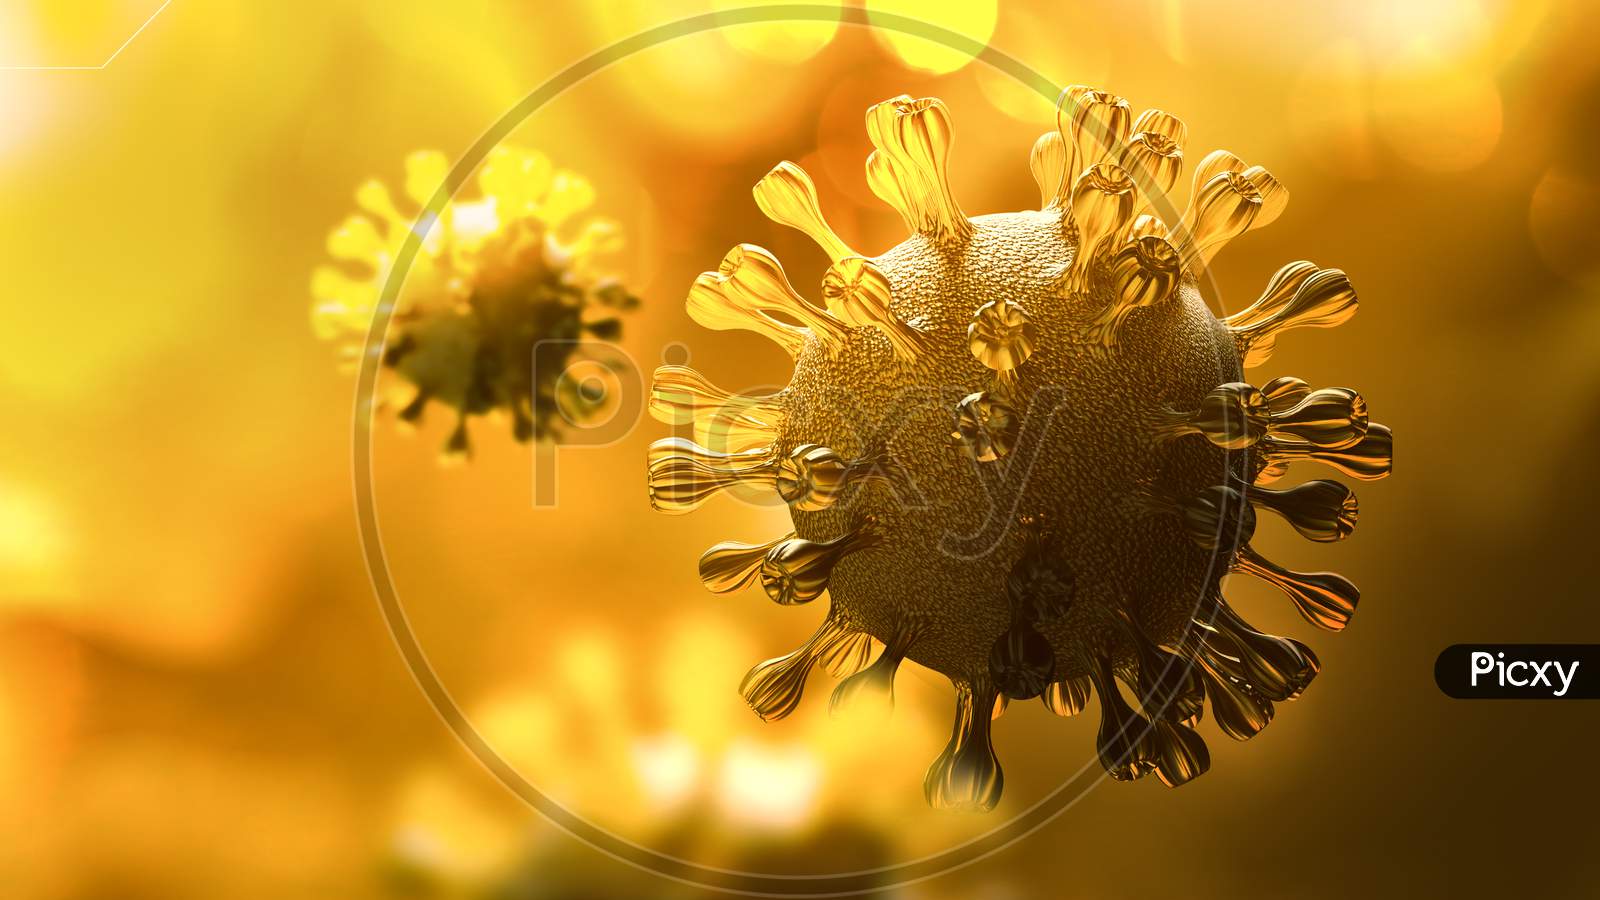 Super Closeup Coronavirus Covid-19 In Human Lung Background. Science Micro Biology Concept. Yellow Corona Virus Outbreak Epidemic. Medical Health Virology Infection Researching. 3D Illustration